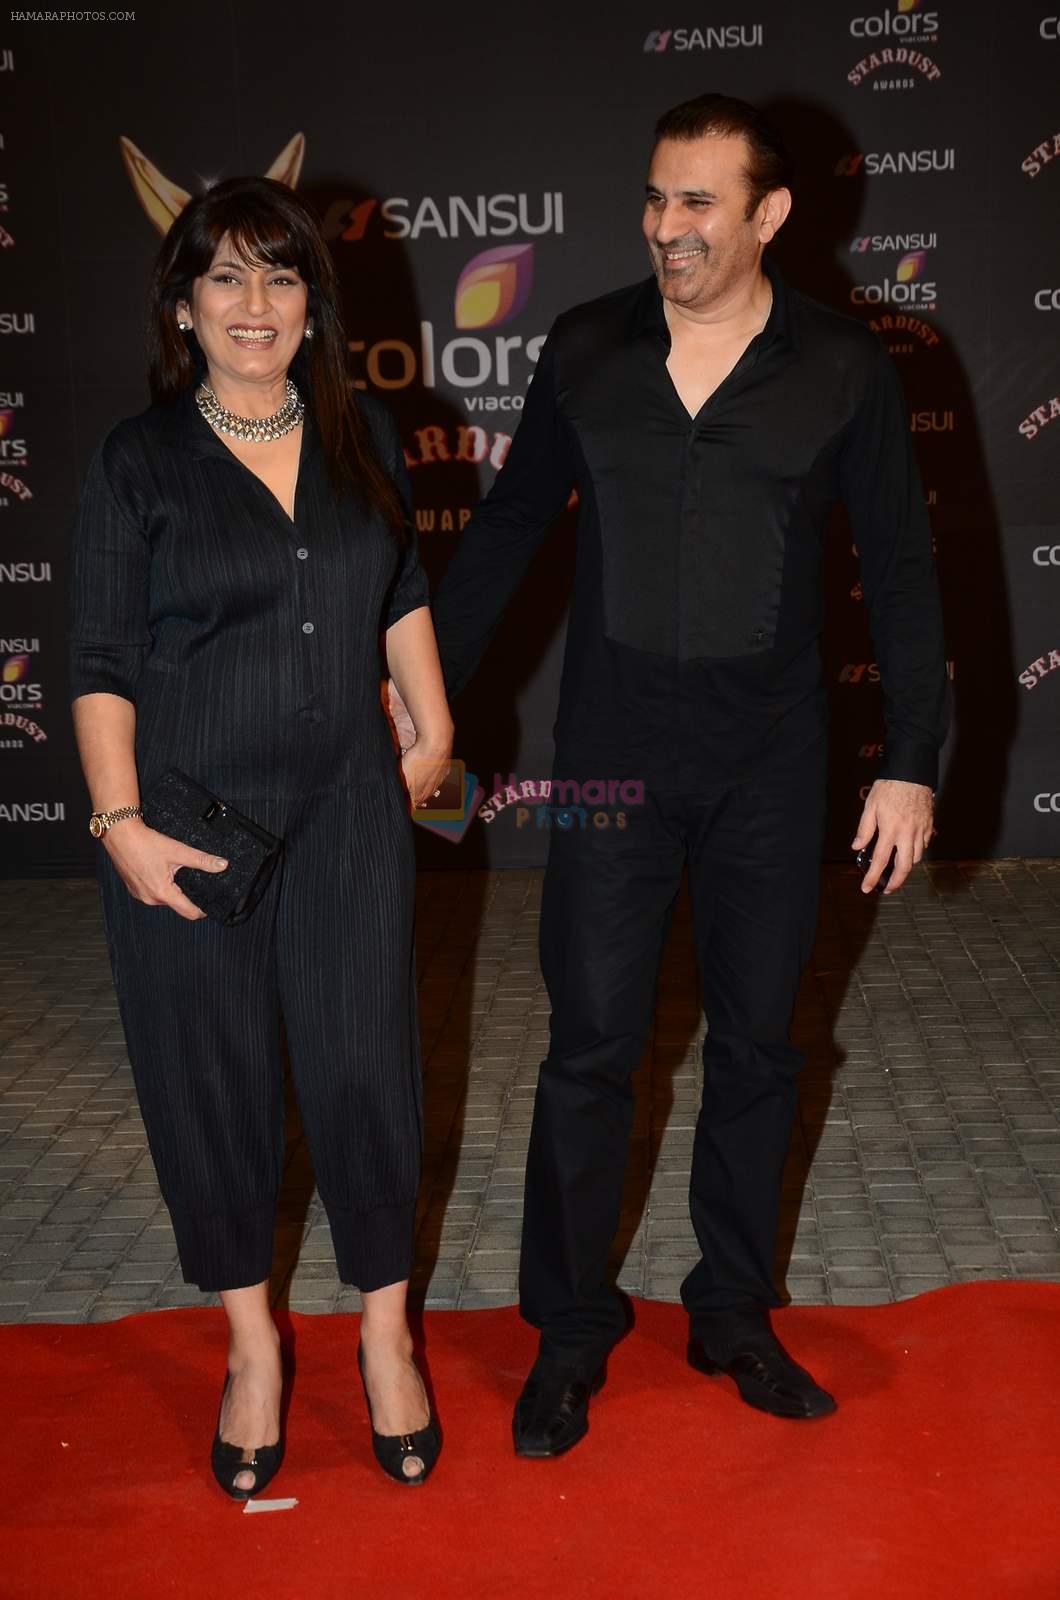 at the red carpet of Stardust awards on 21st Dec 2015